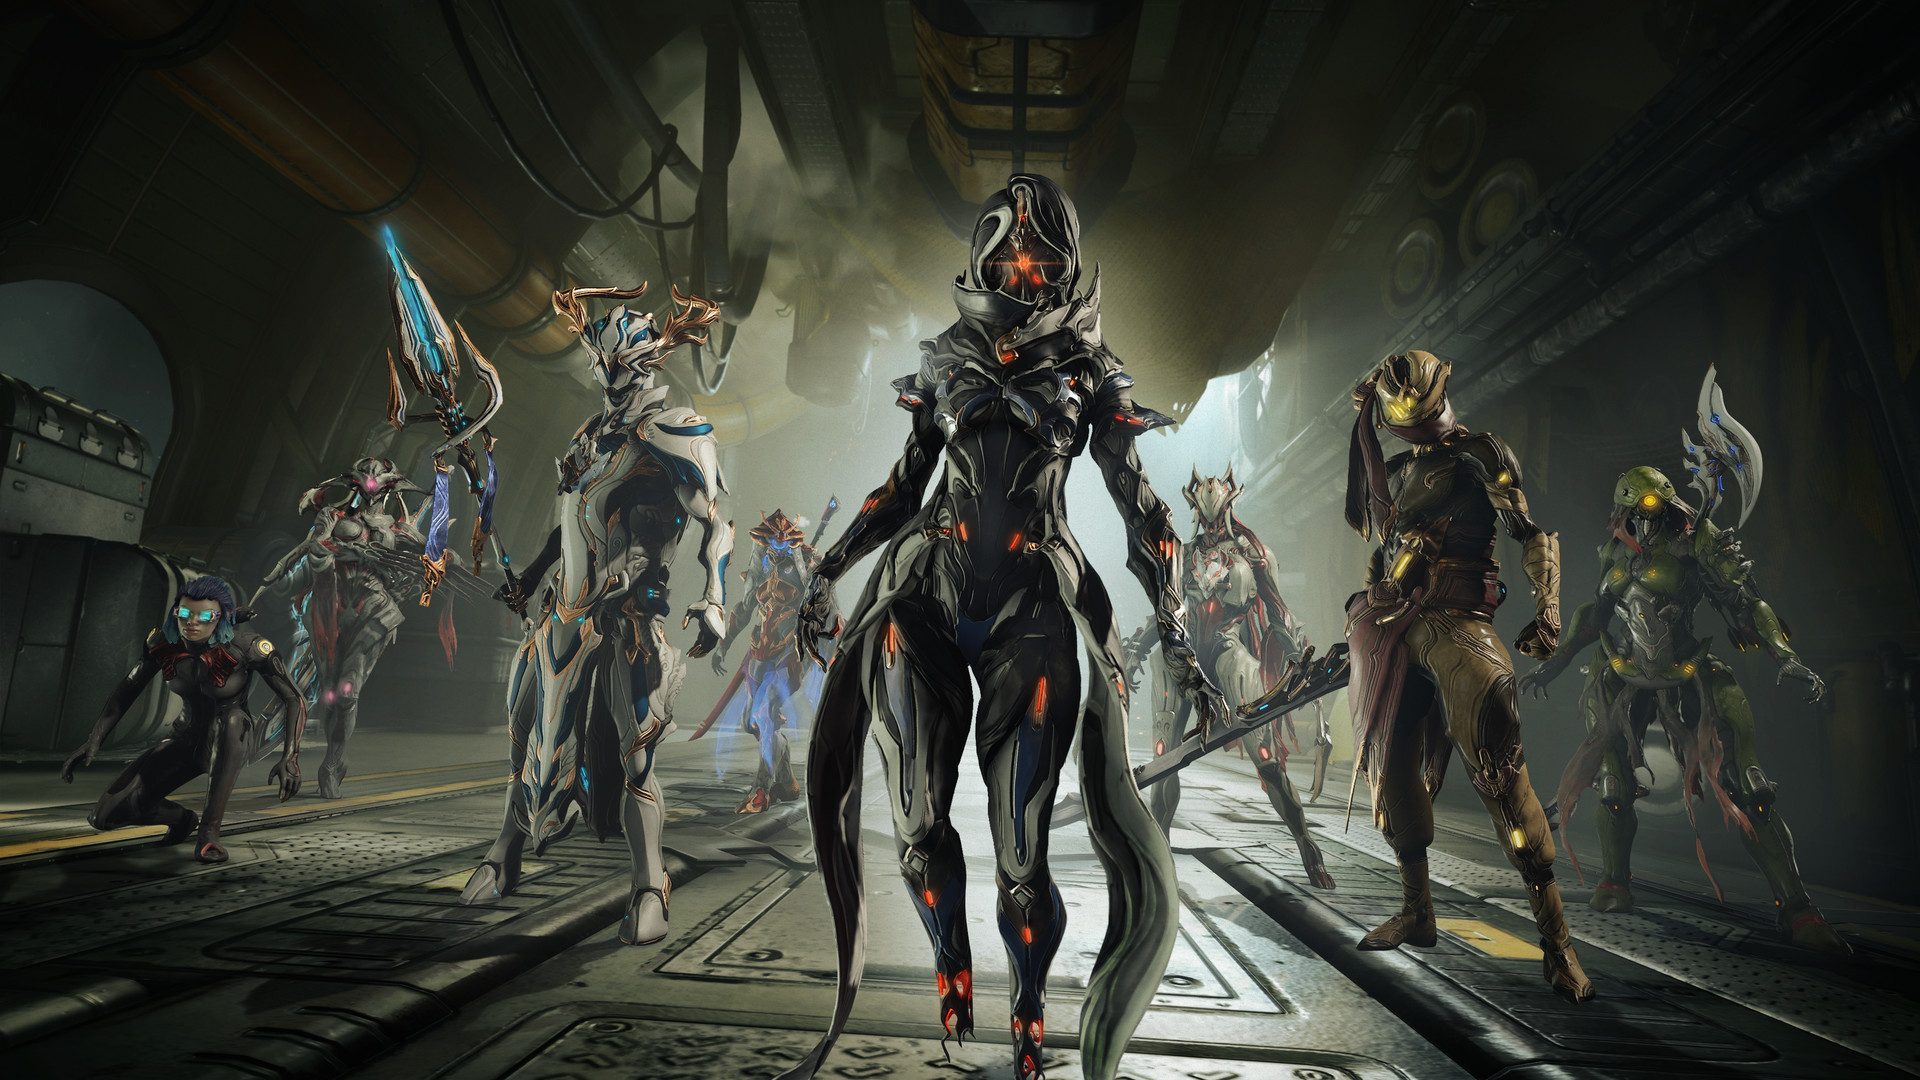  Warframe Tools and Resources Every Player Should Know About